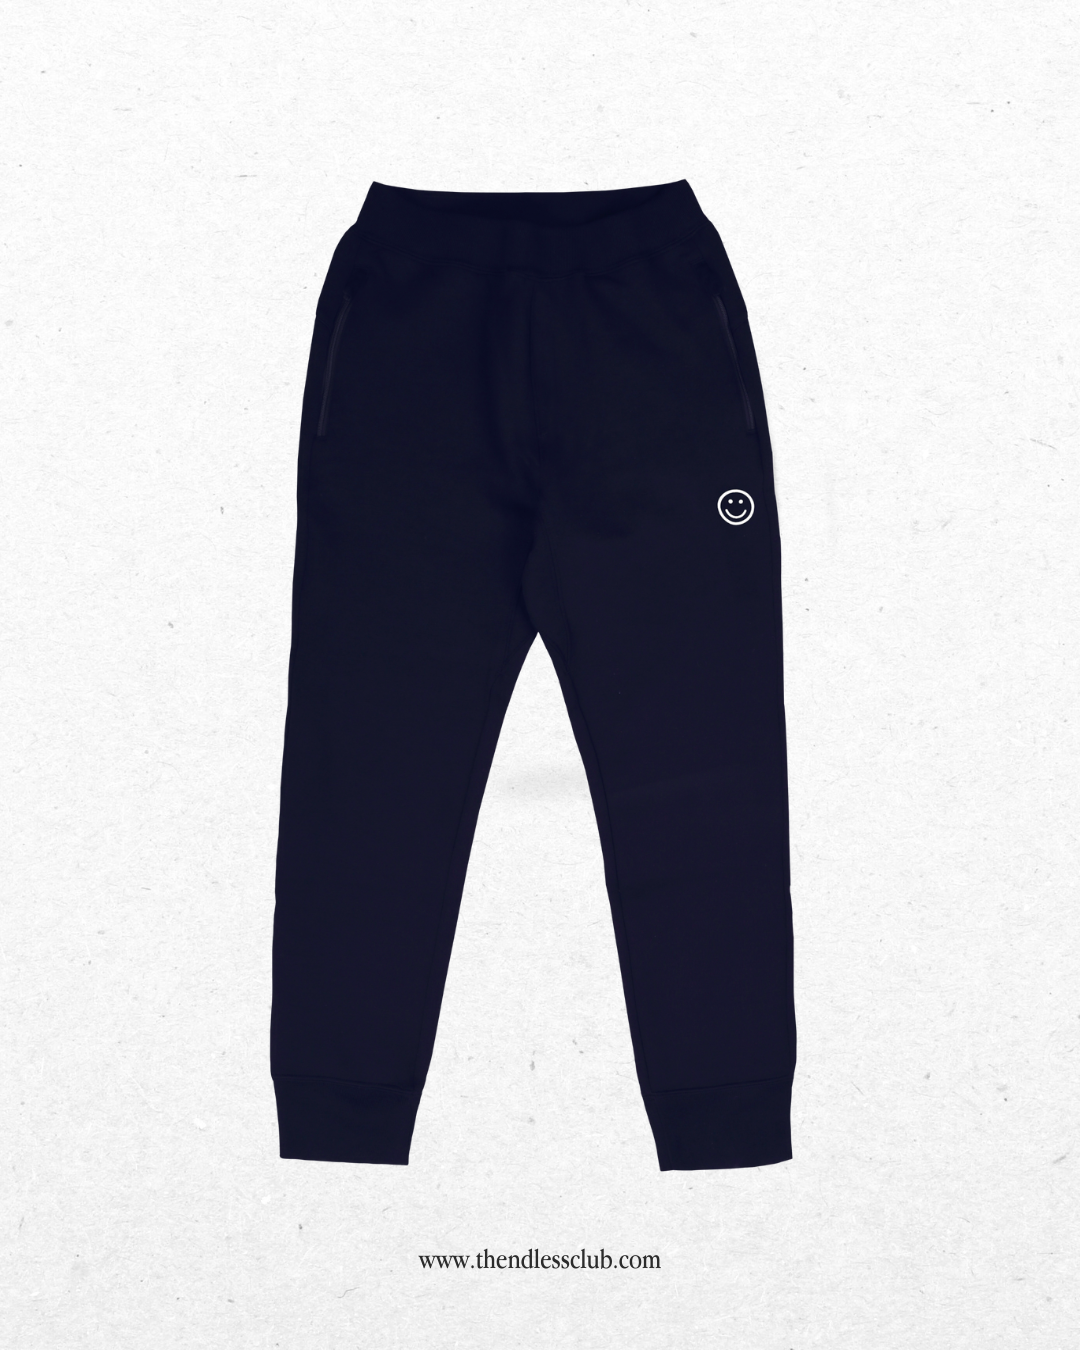 The Olympic Blue Team - pants